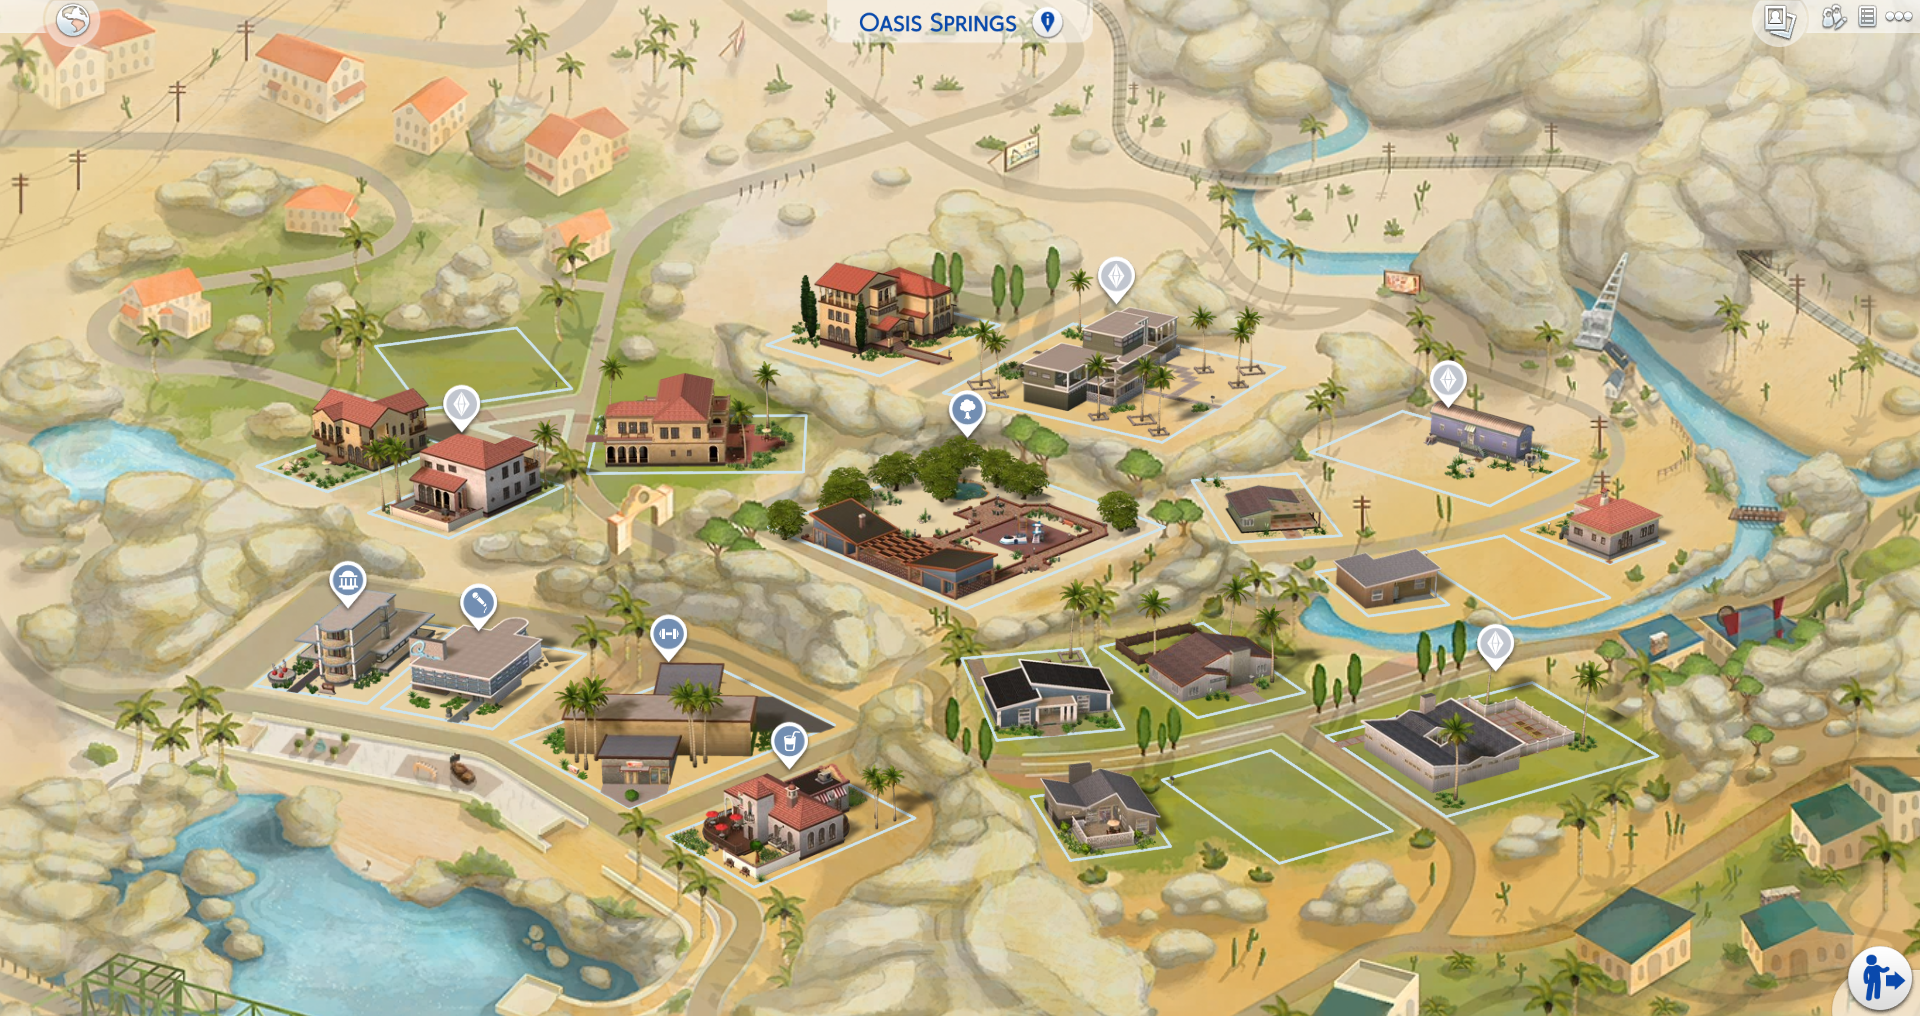 the sims 4 brookheights open world mod download